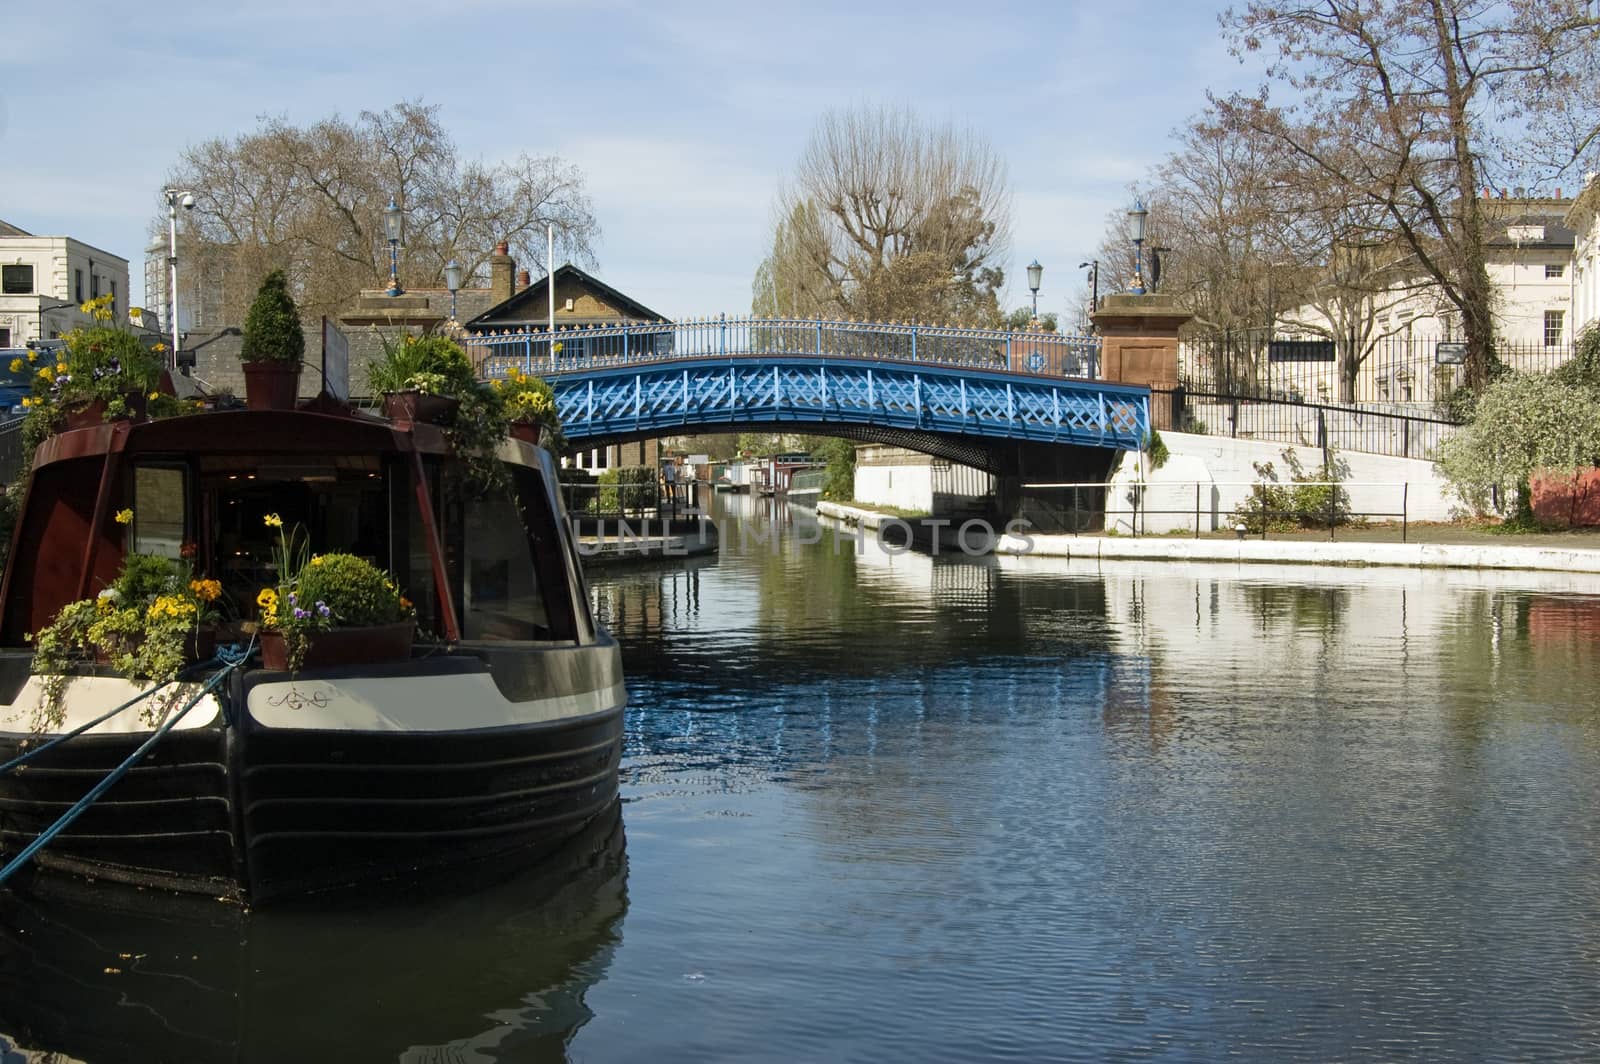 One of the road viaducts over the canals at Little Venice in Paddington, West London. The picturesque area is where the Regent's and Grand Union Canals meet.